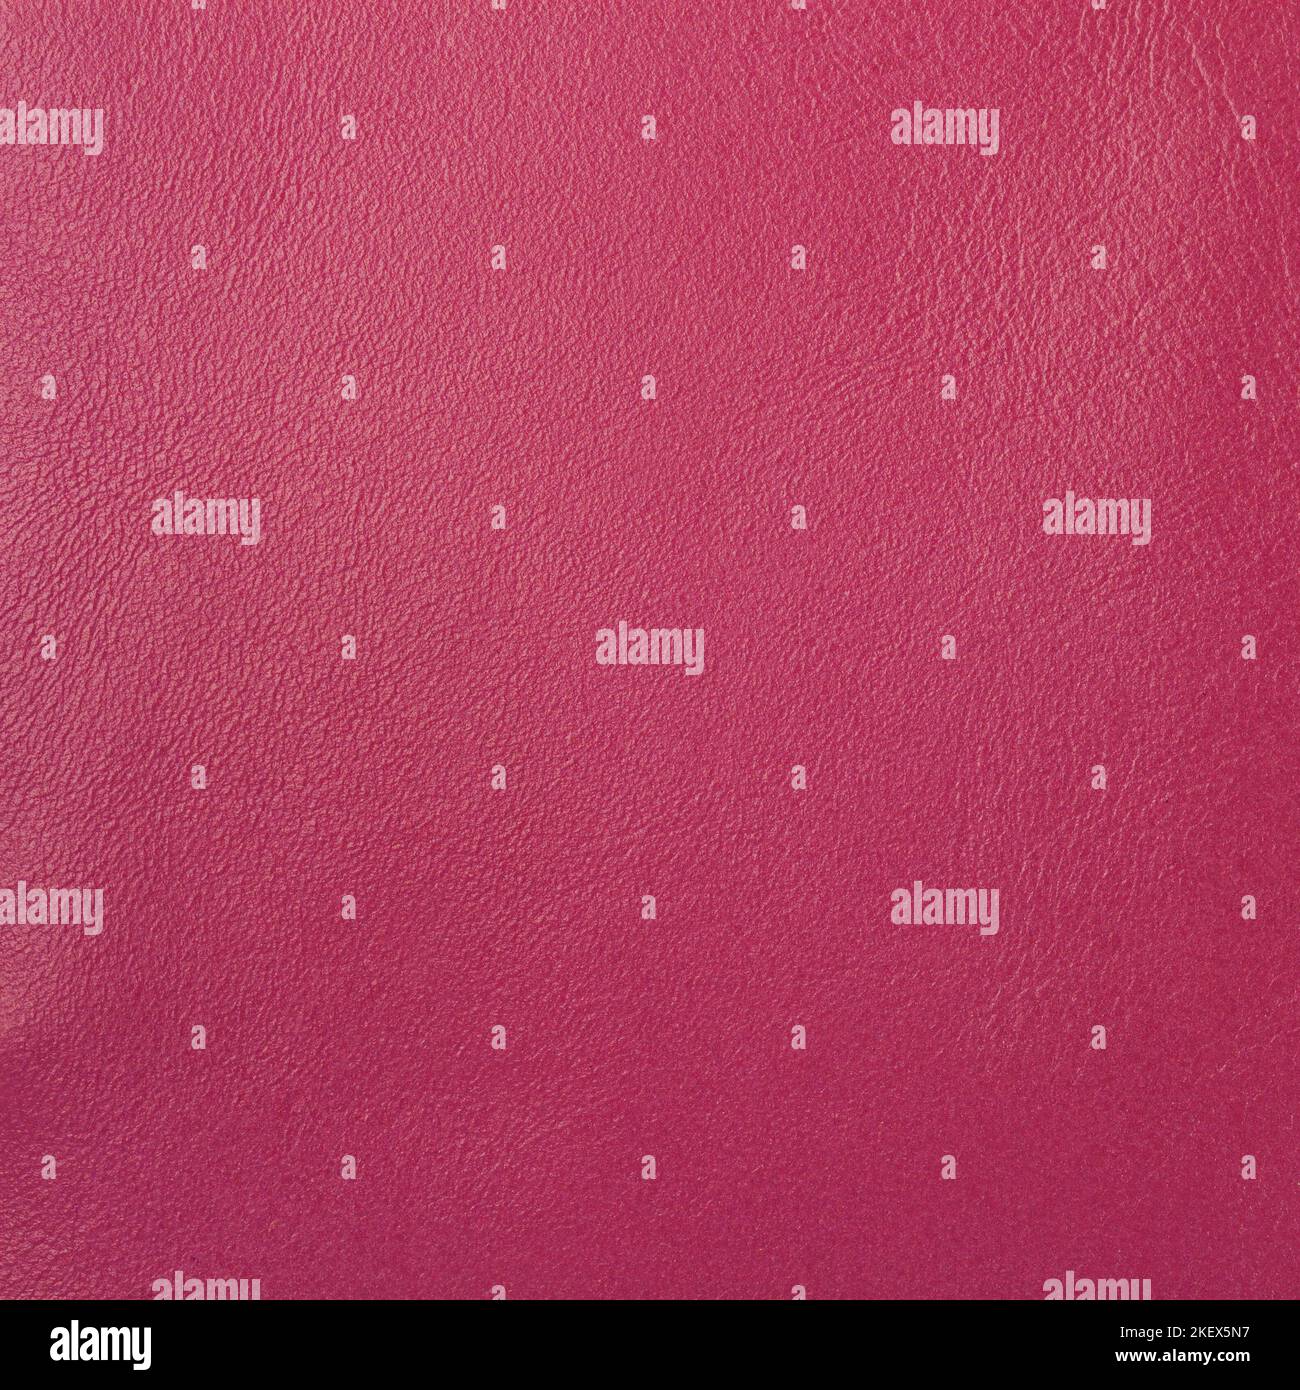 Closeup of seamless pink leather texture Stock Photo by